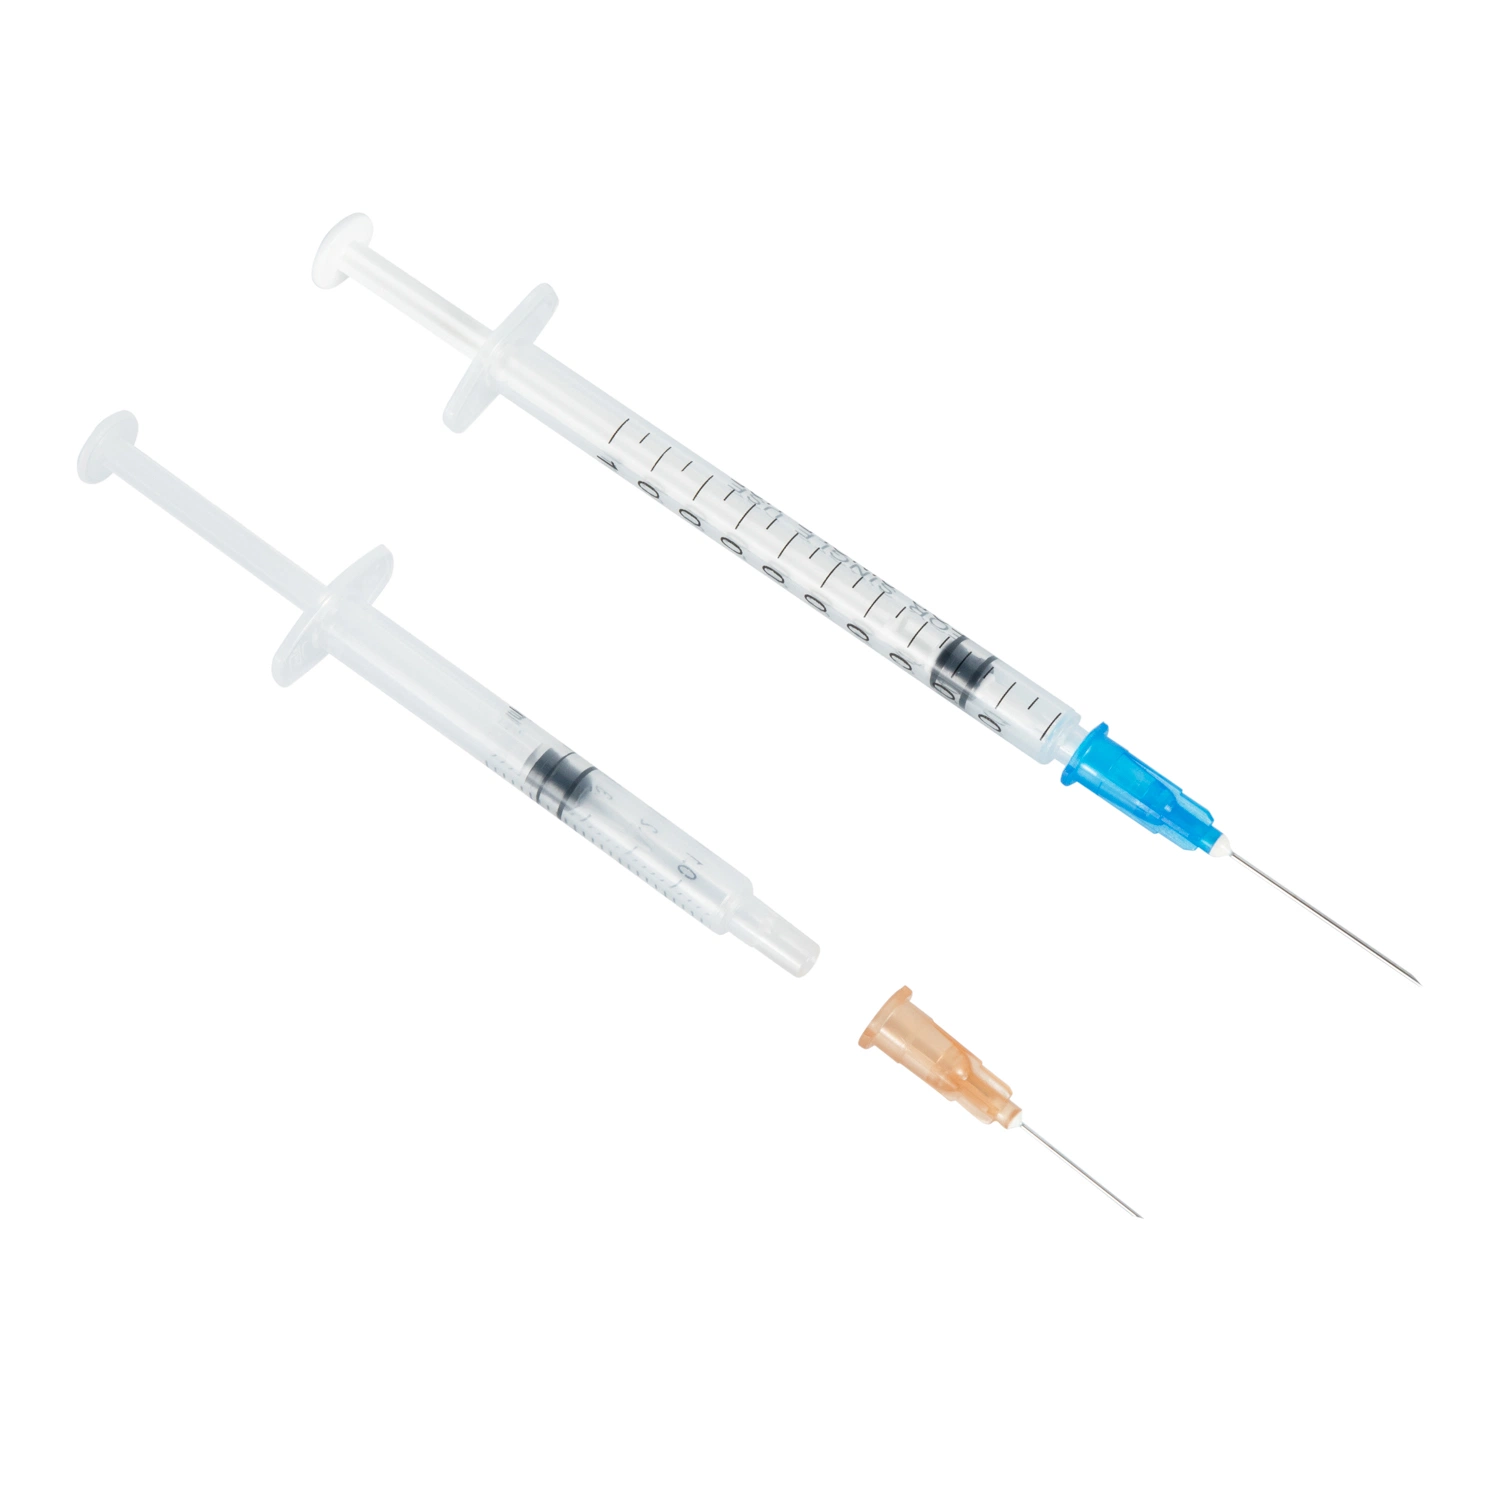 China Wholesale/Supplier Medical Products Supply Patented Product Disposable Medical Device Ad Auto-Disable 0.05ml Syringe